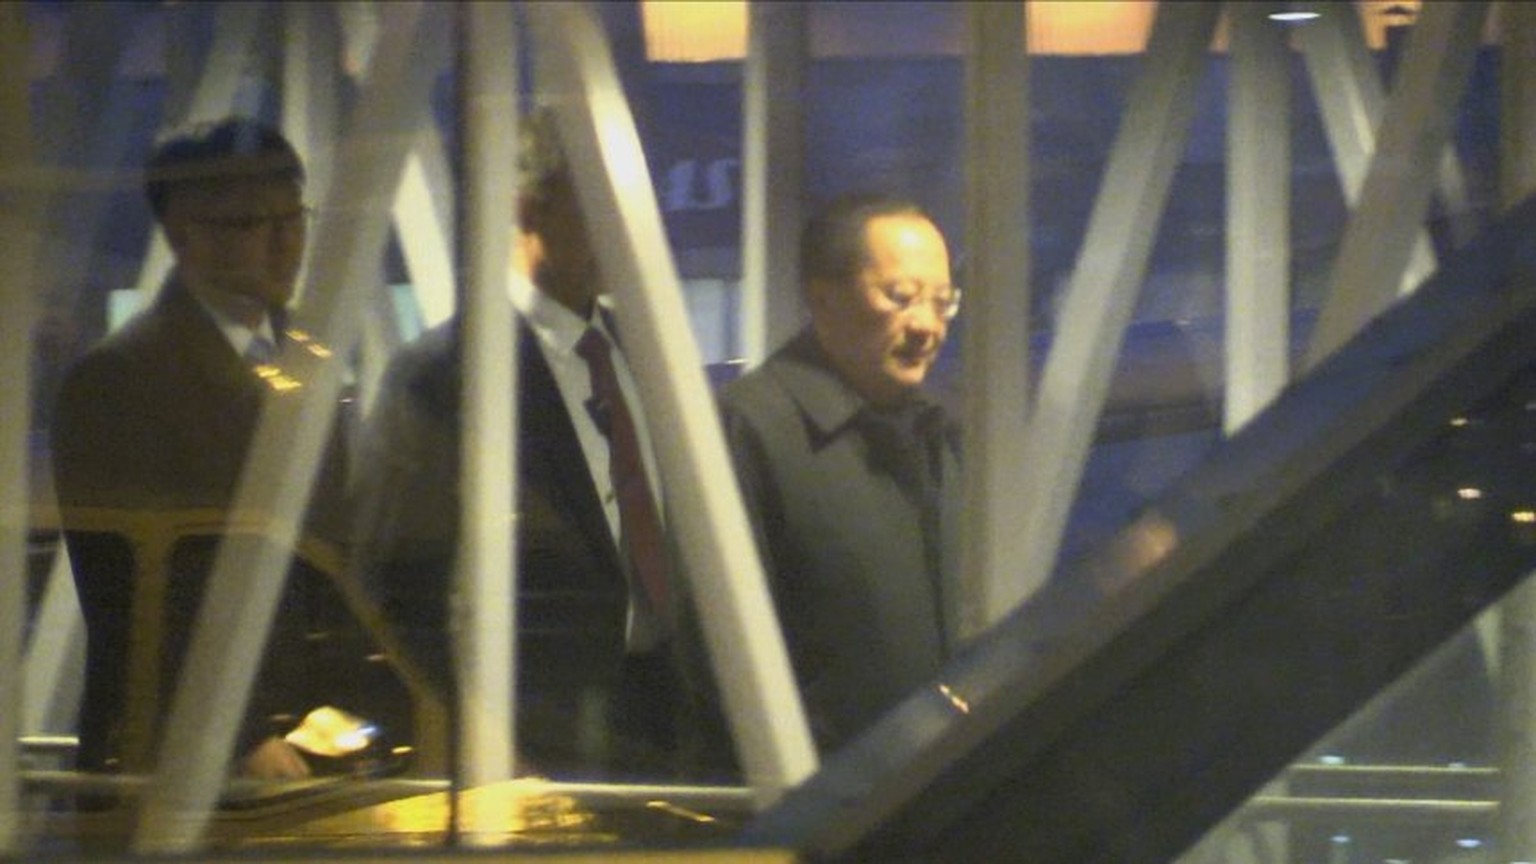 A video grab taken from an AFPTV video shows North Korean Foreign Minister Ri Yong-Ho (R) and his delegation arrive at the airport in Stockholm, Sweden, on March 15, 2018.
North Korea's top diplomat a ...